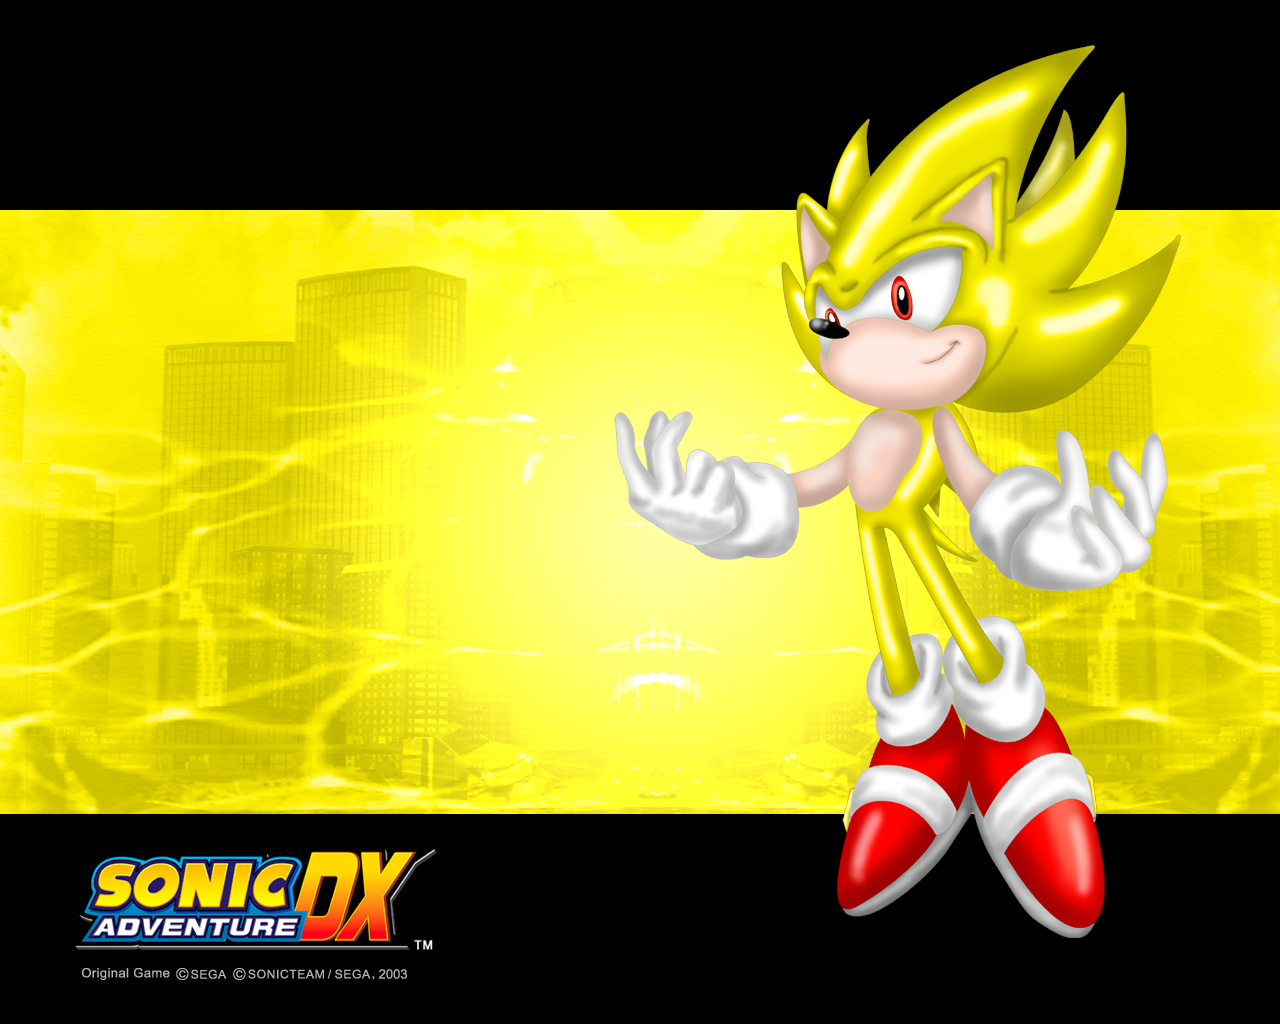 HD super sonic wallpapers